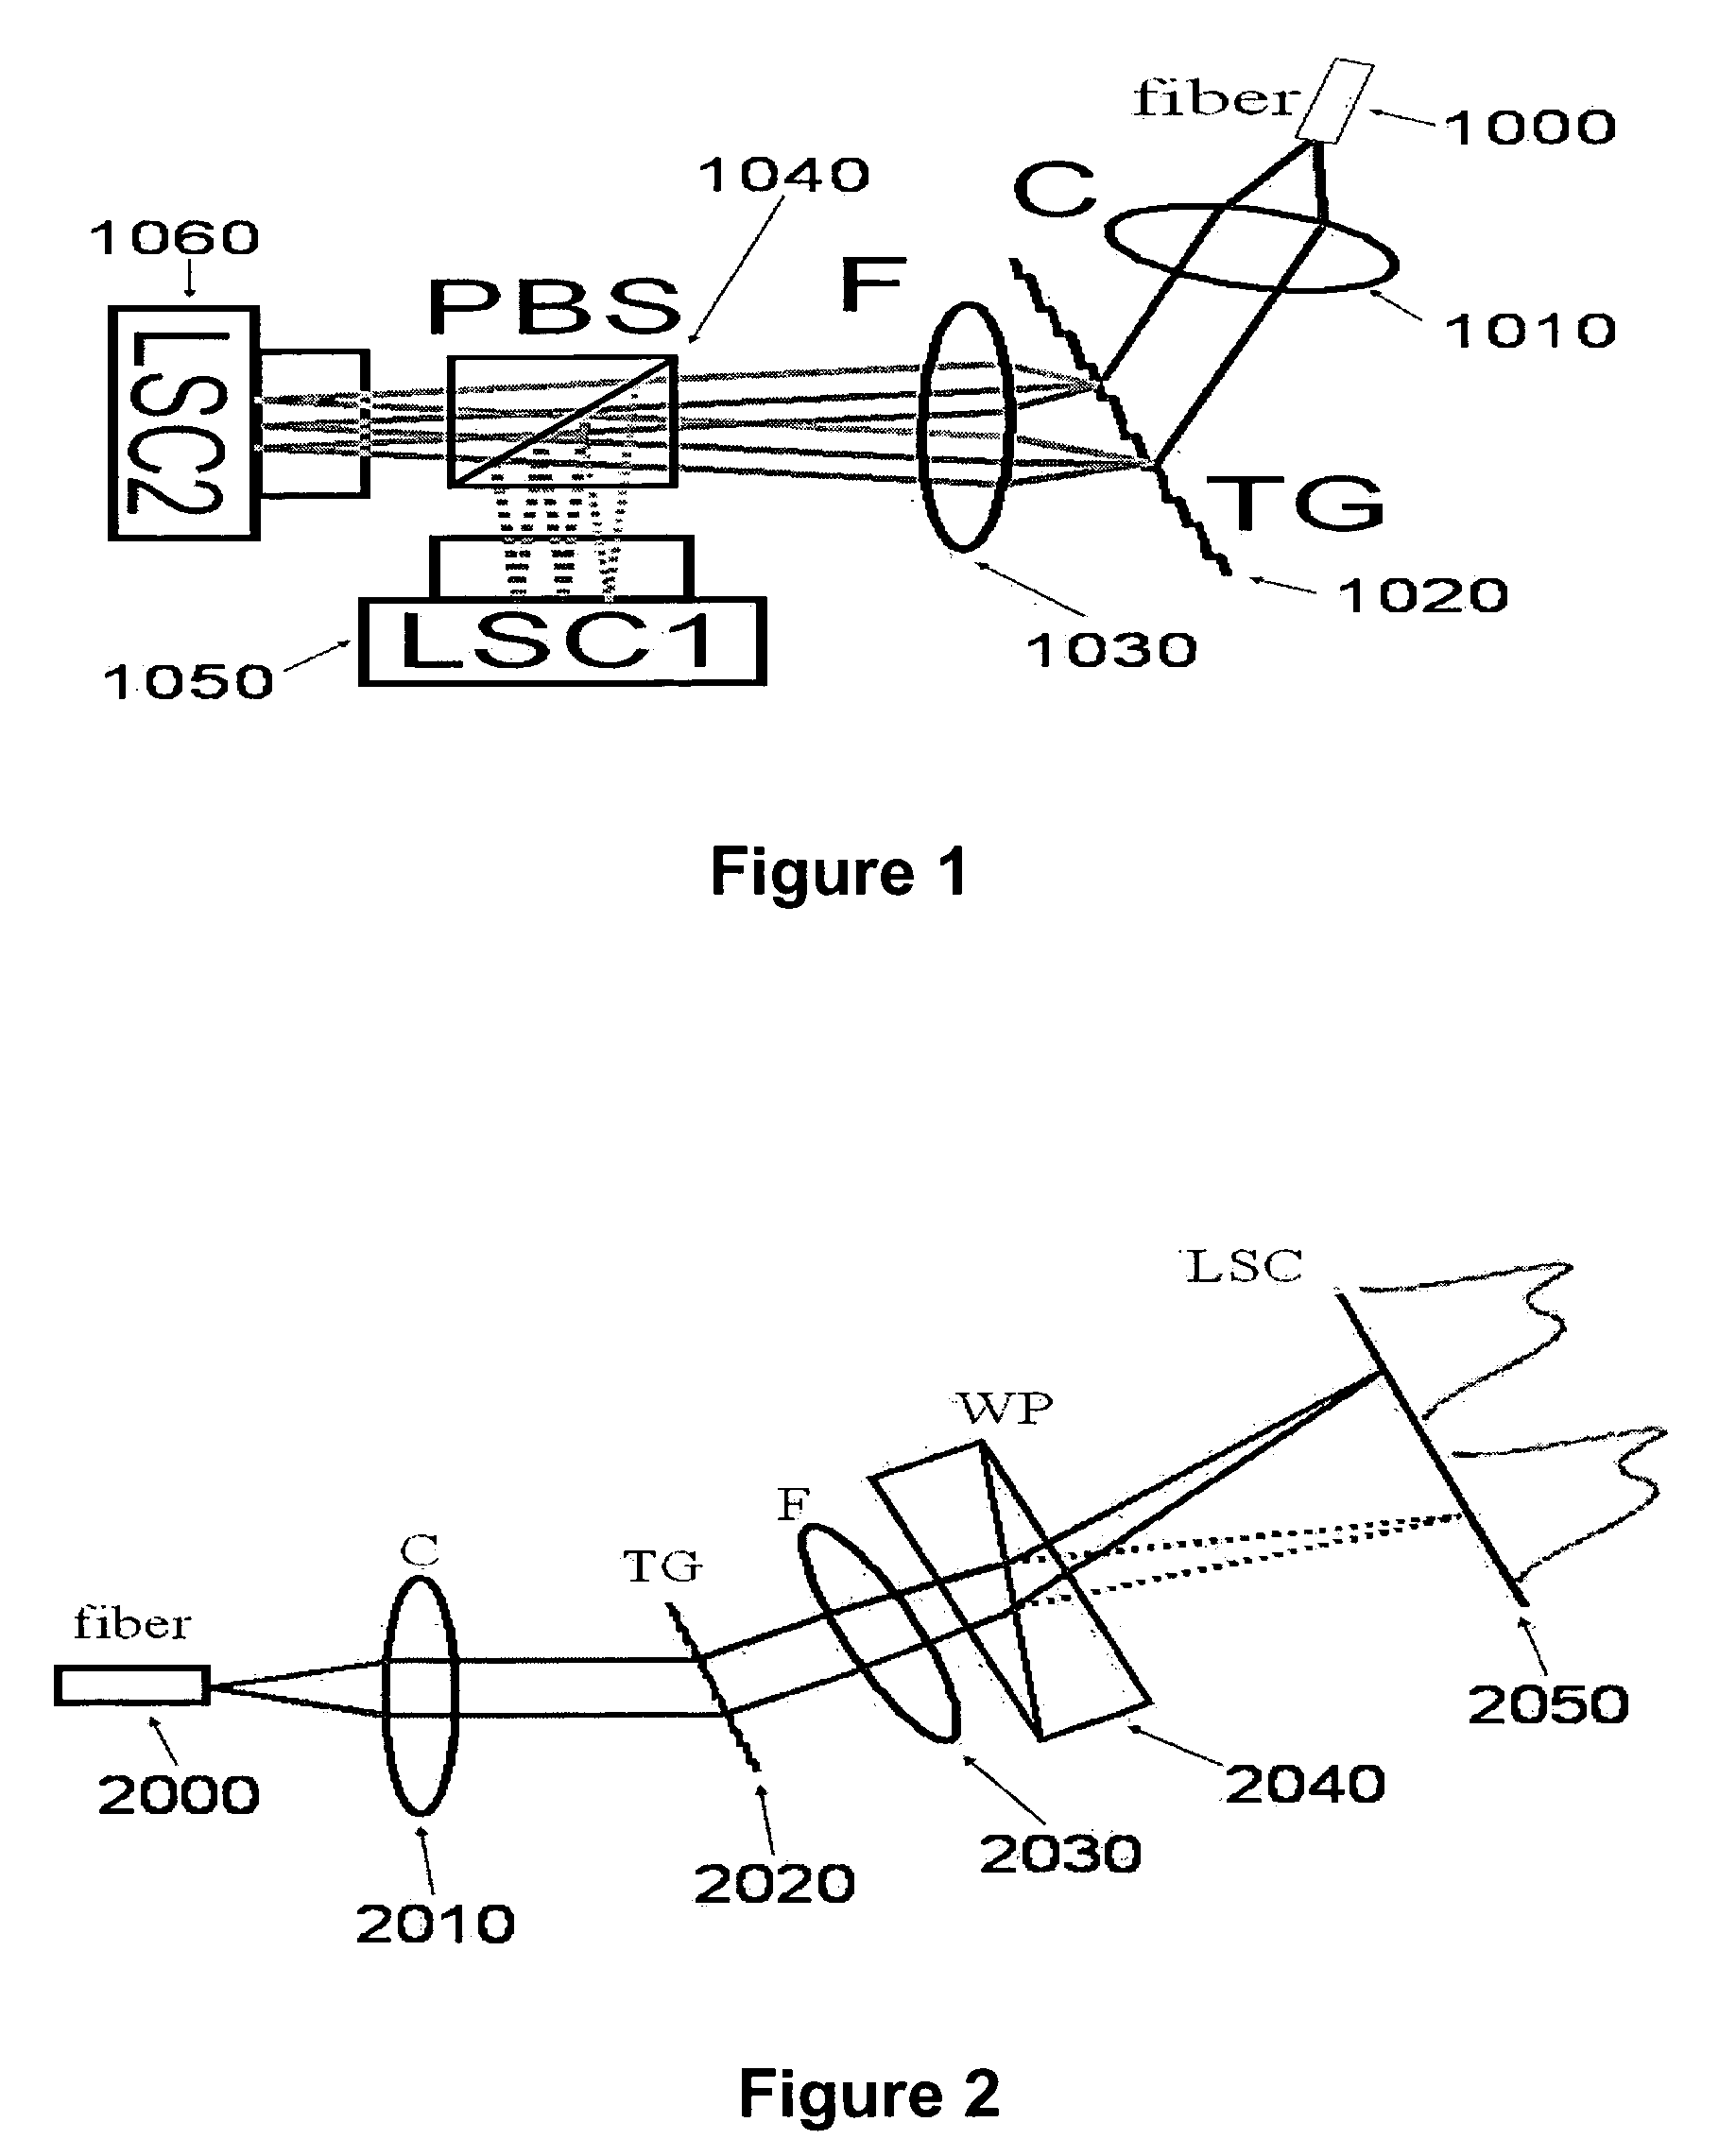 Arrangements, systems and methods capable of providing spectral-domain polarization-sensitive optical coherence tomography